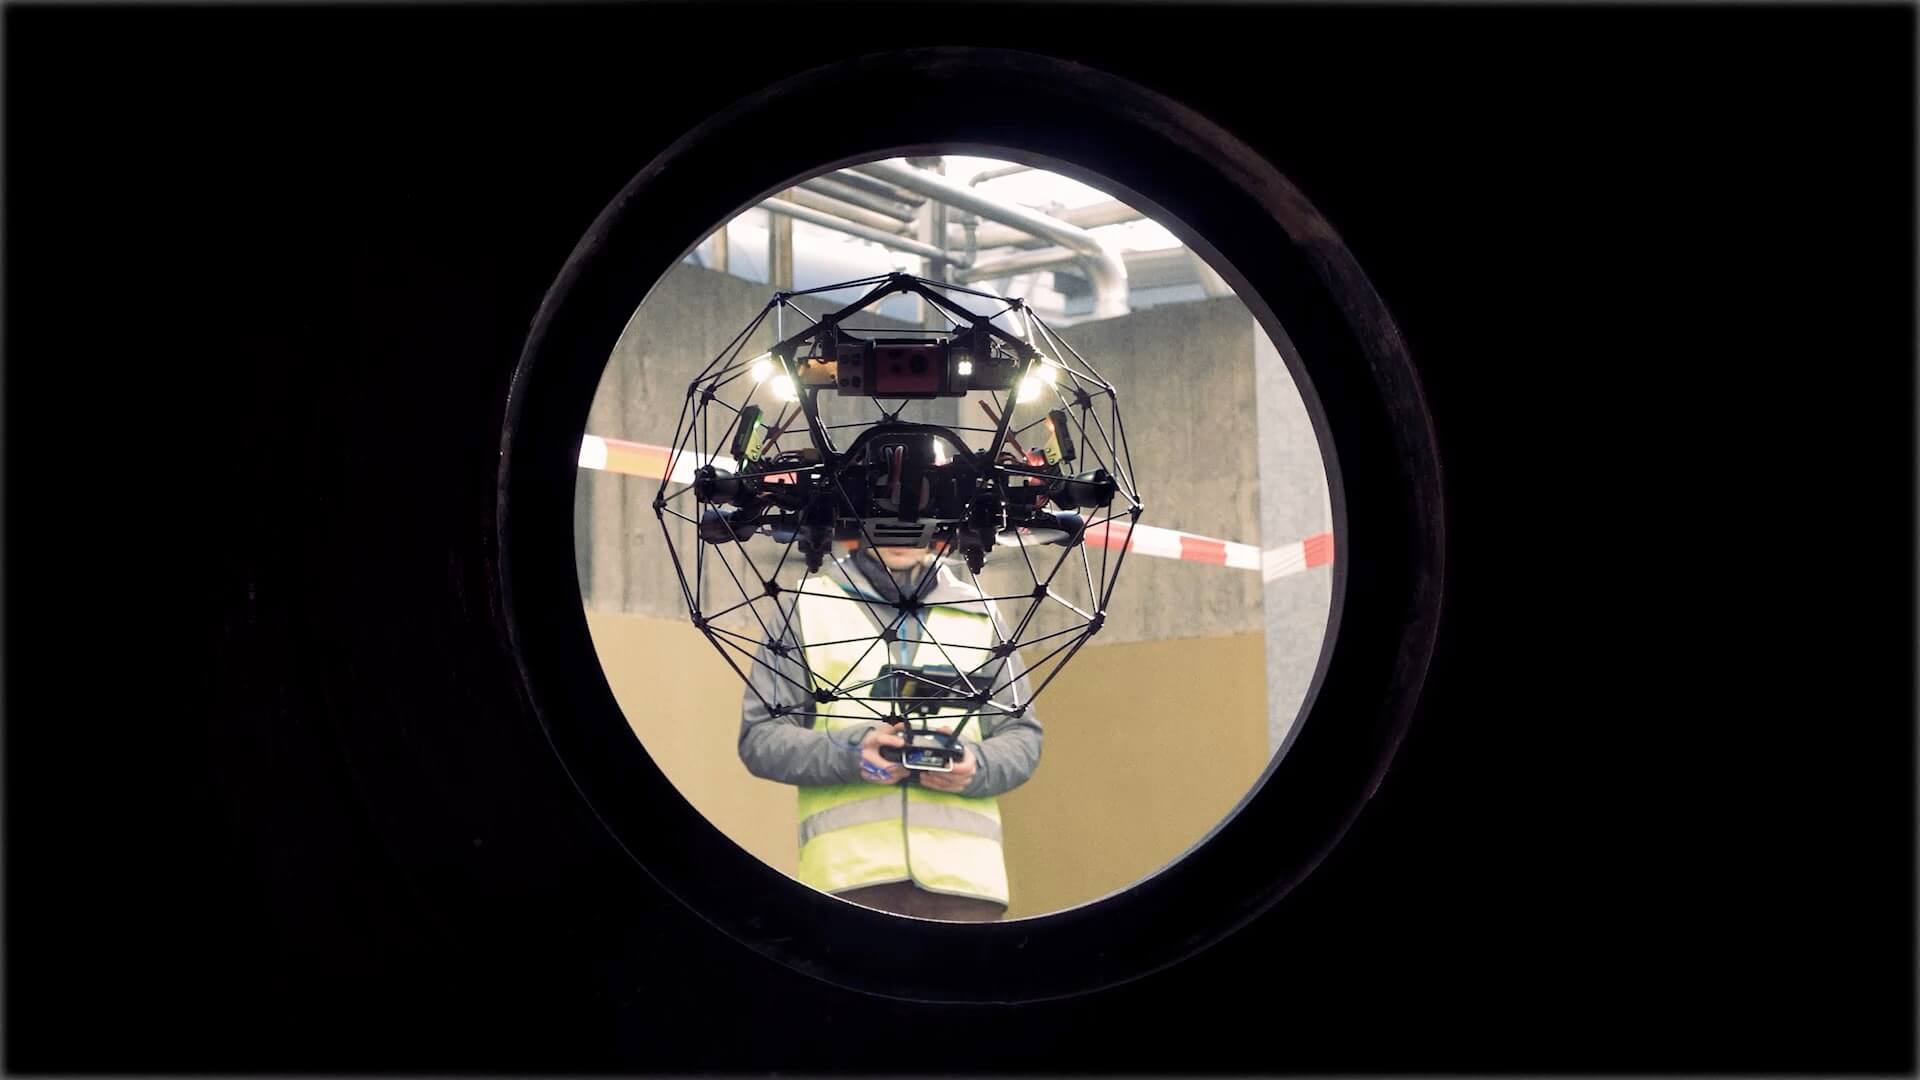 Inspect &amp; Explore: Confined Space Drone Inspections with Elios 2 Drone Technology